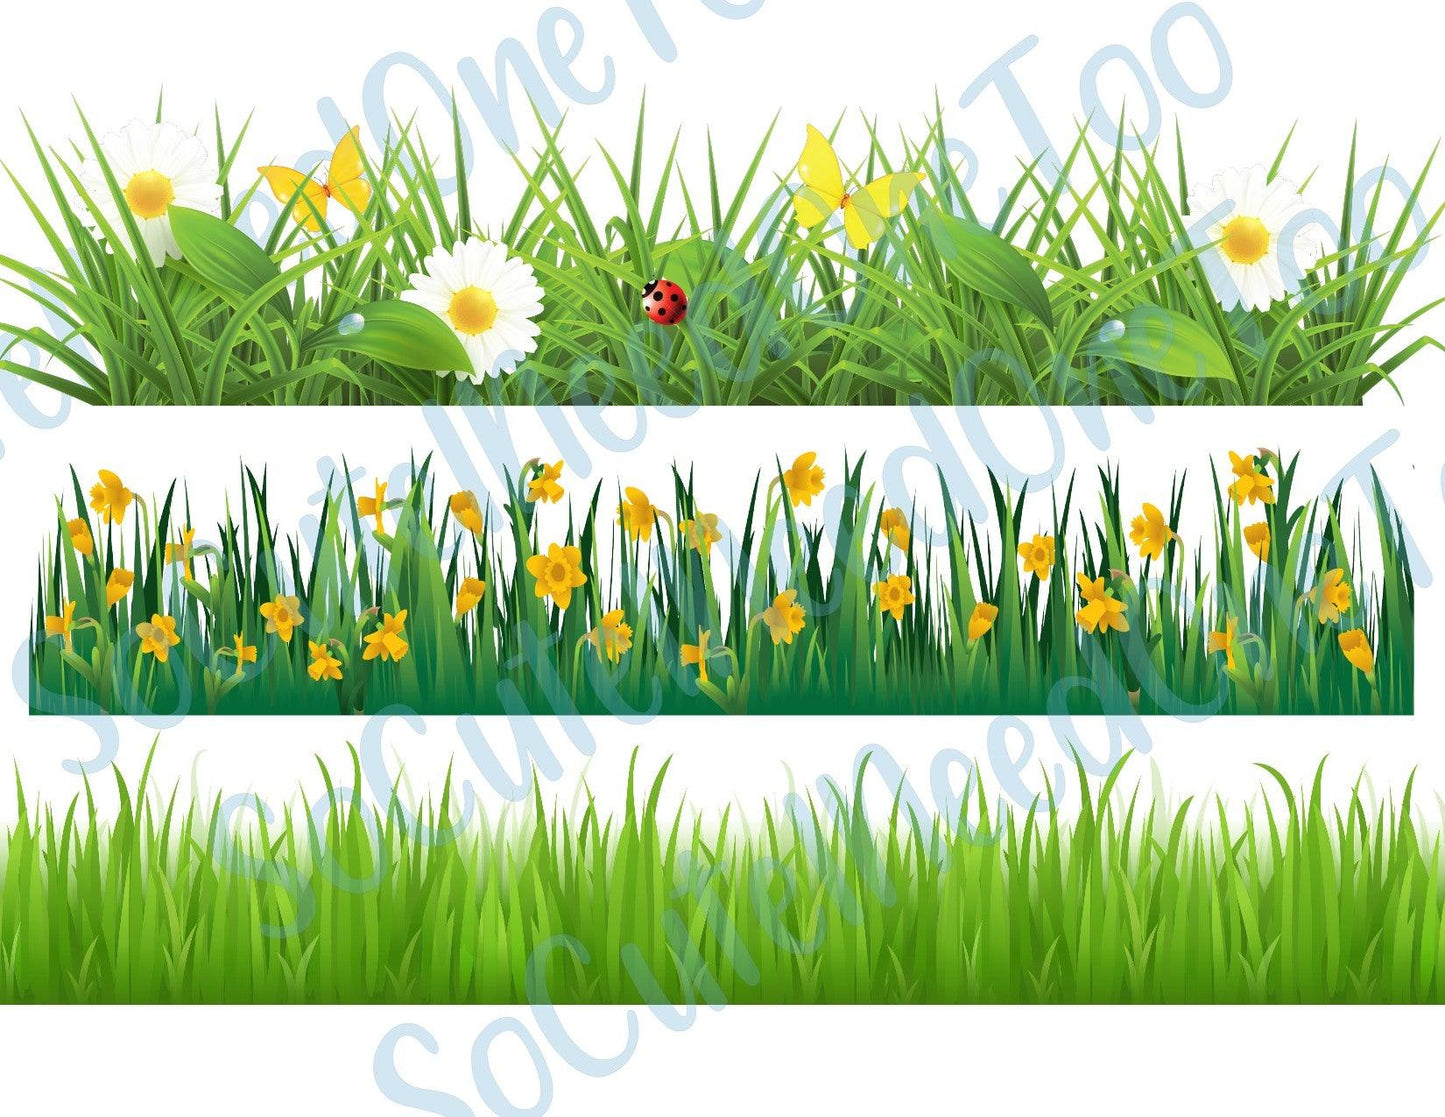 Grass Boarders On Clear/White Waterslide Paper Ready To Use - SoCuteINeedOneToo